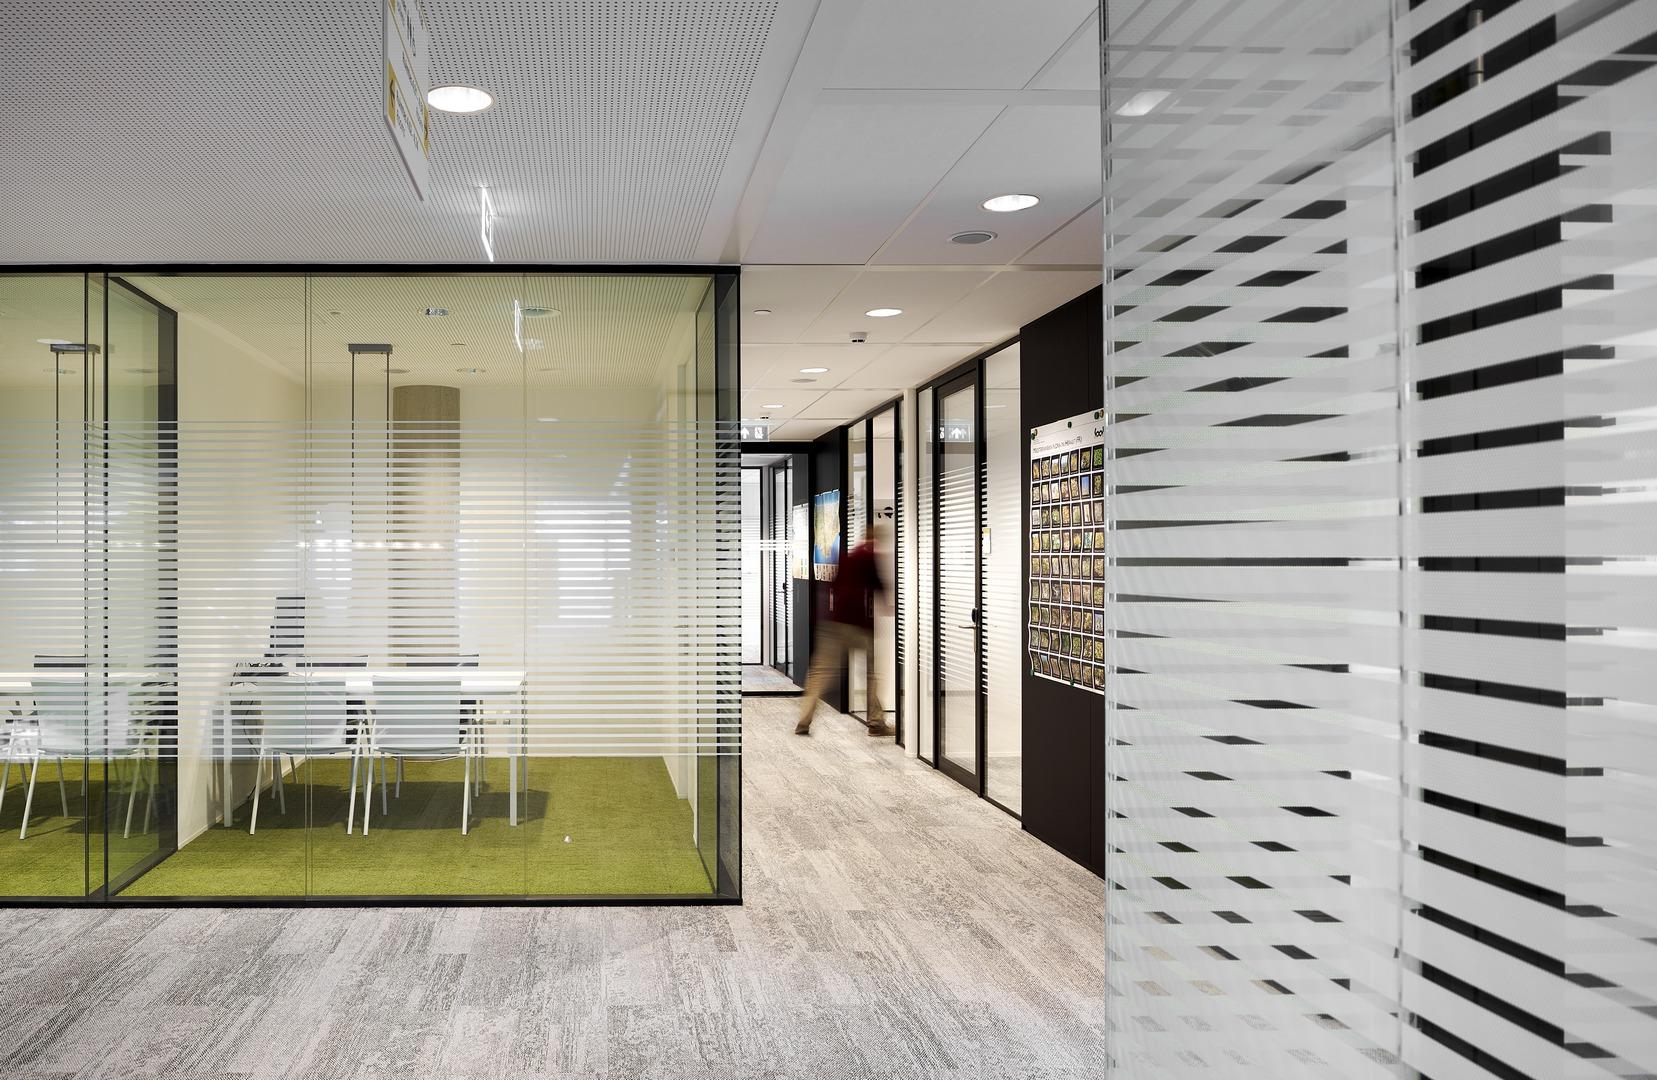 Single and double glass office walls with vector patern